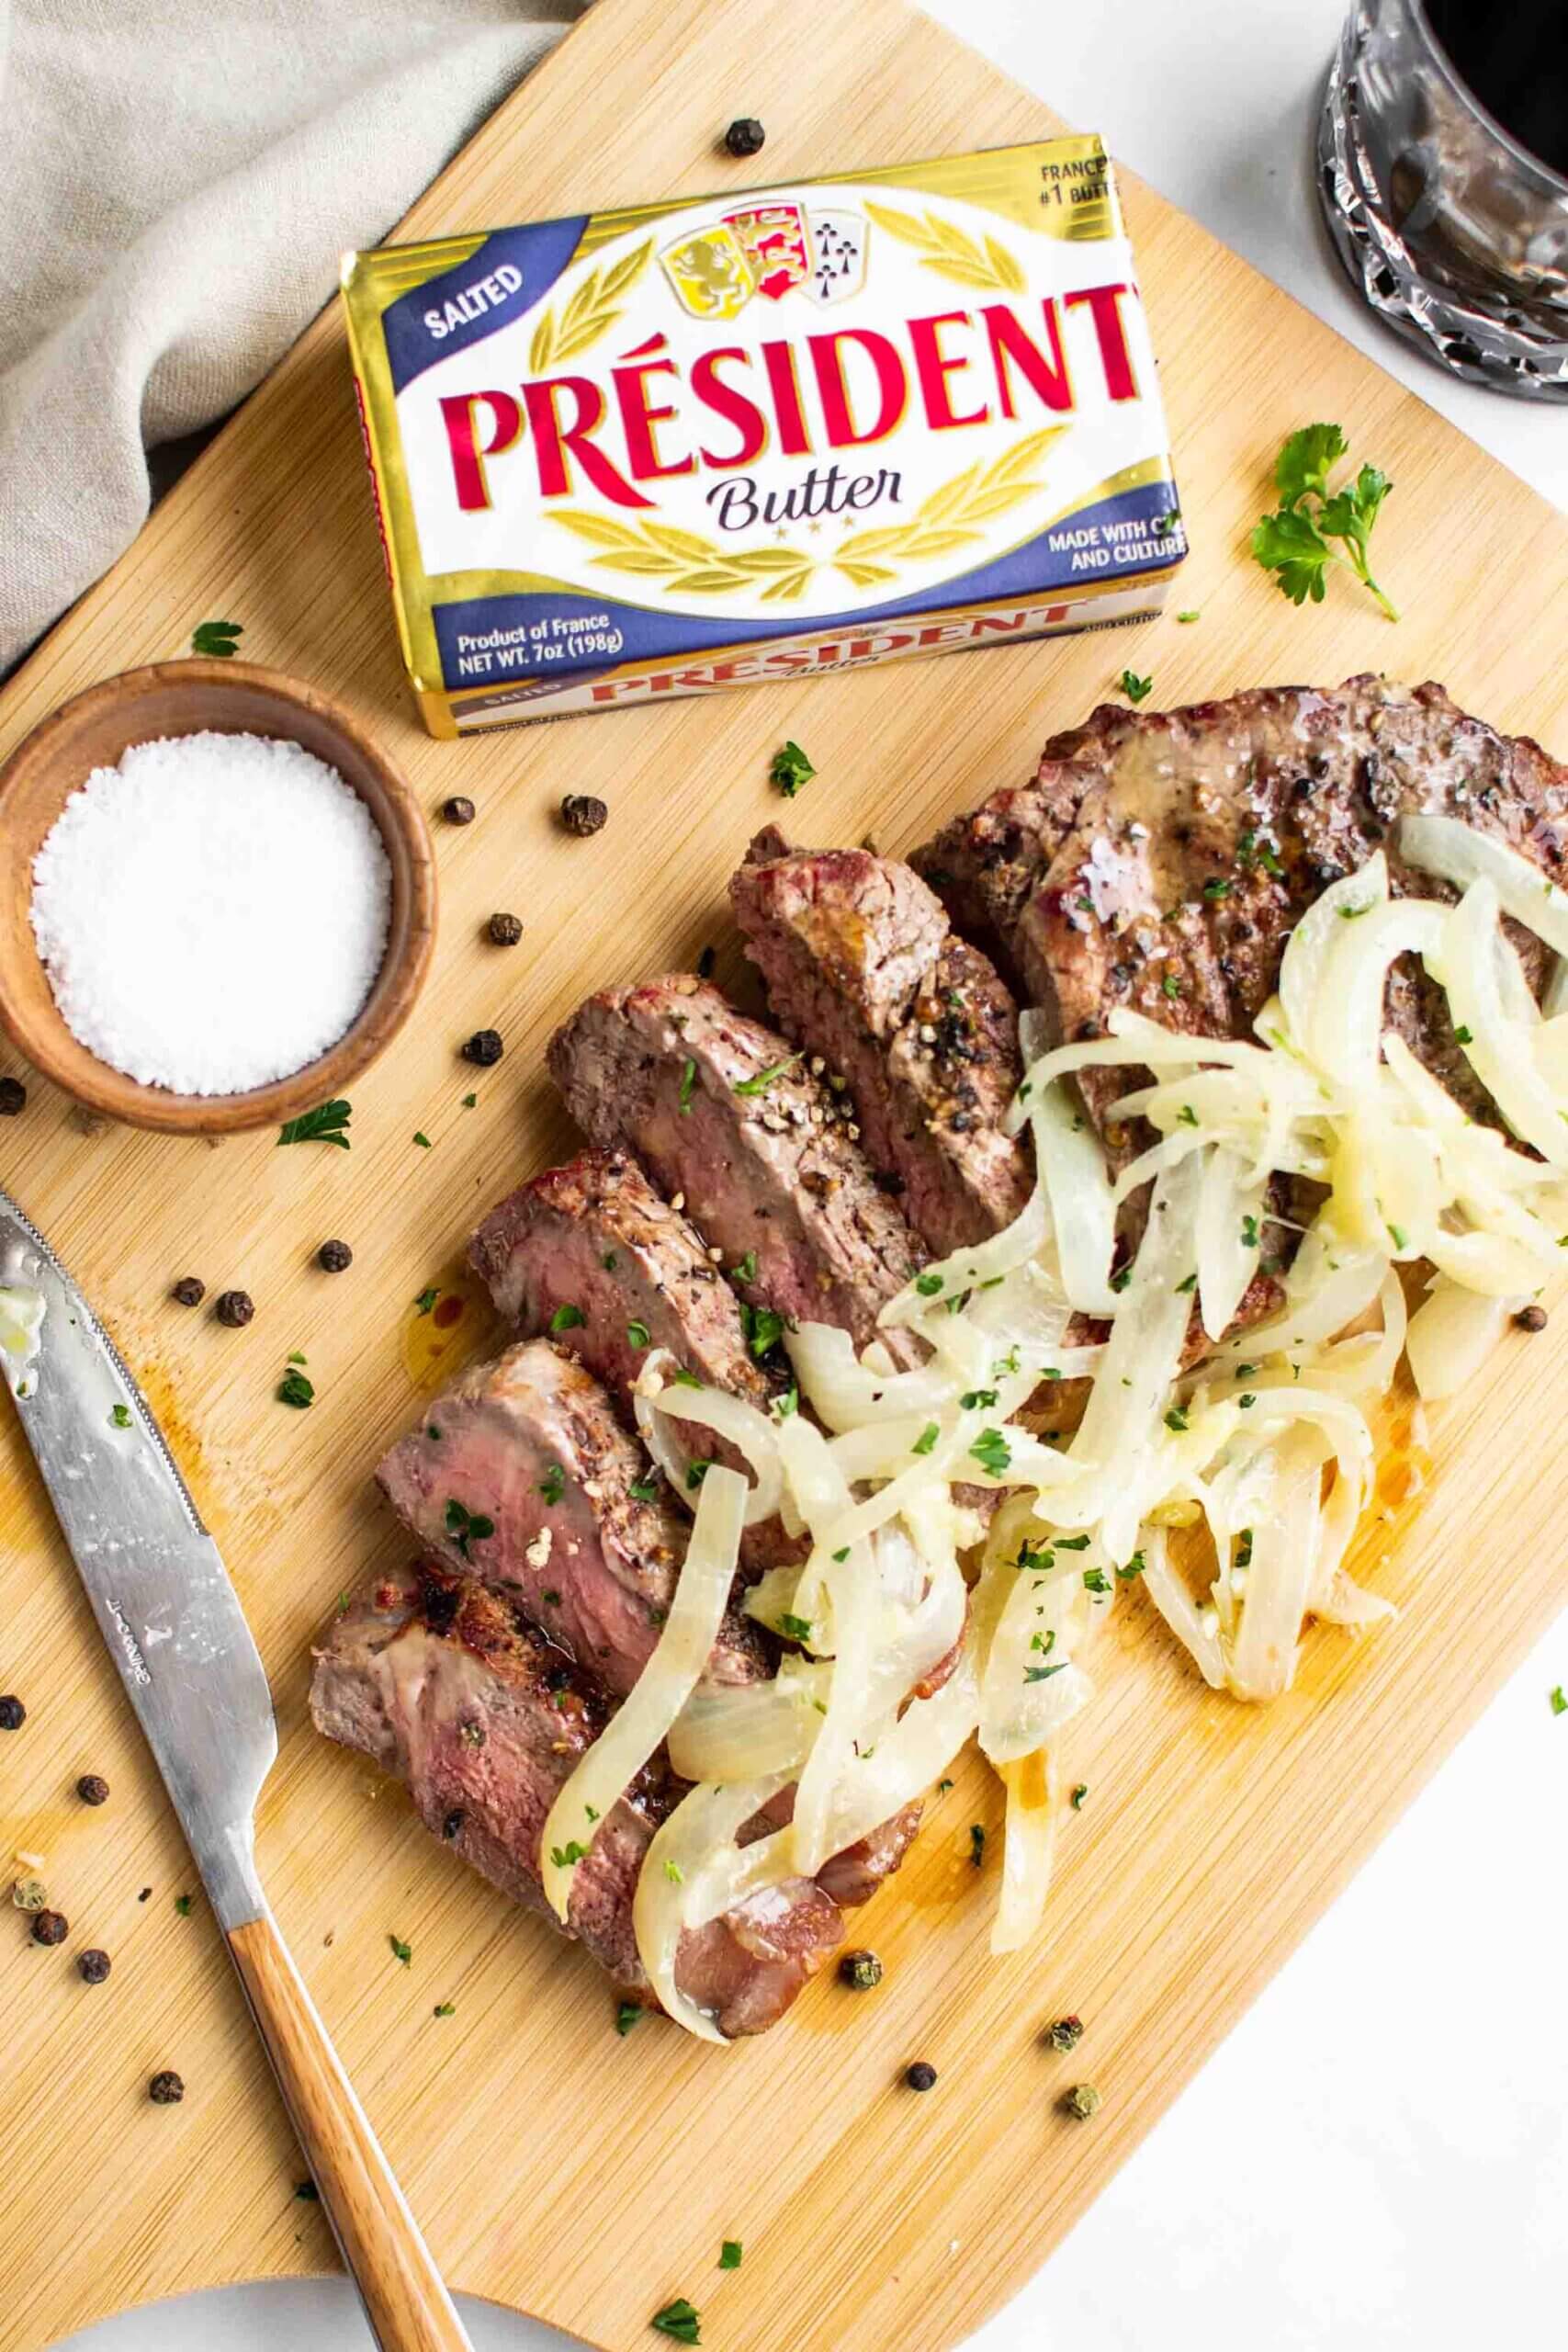 Steak with Garlic Butter Onions on a cutting board with salt and pepper and a knife and fork. Président butter block in top left.